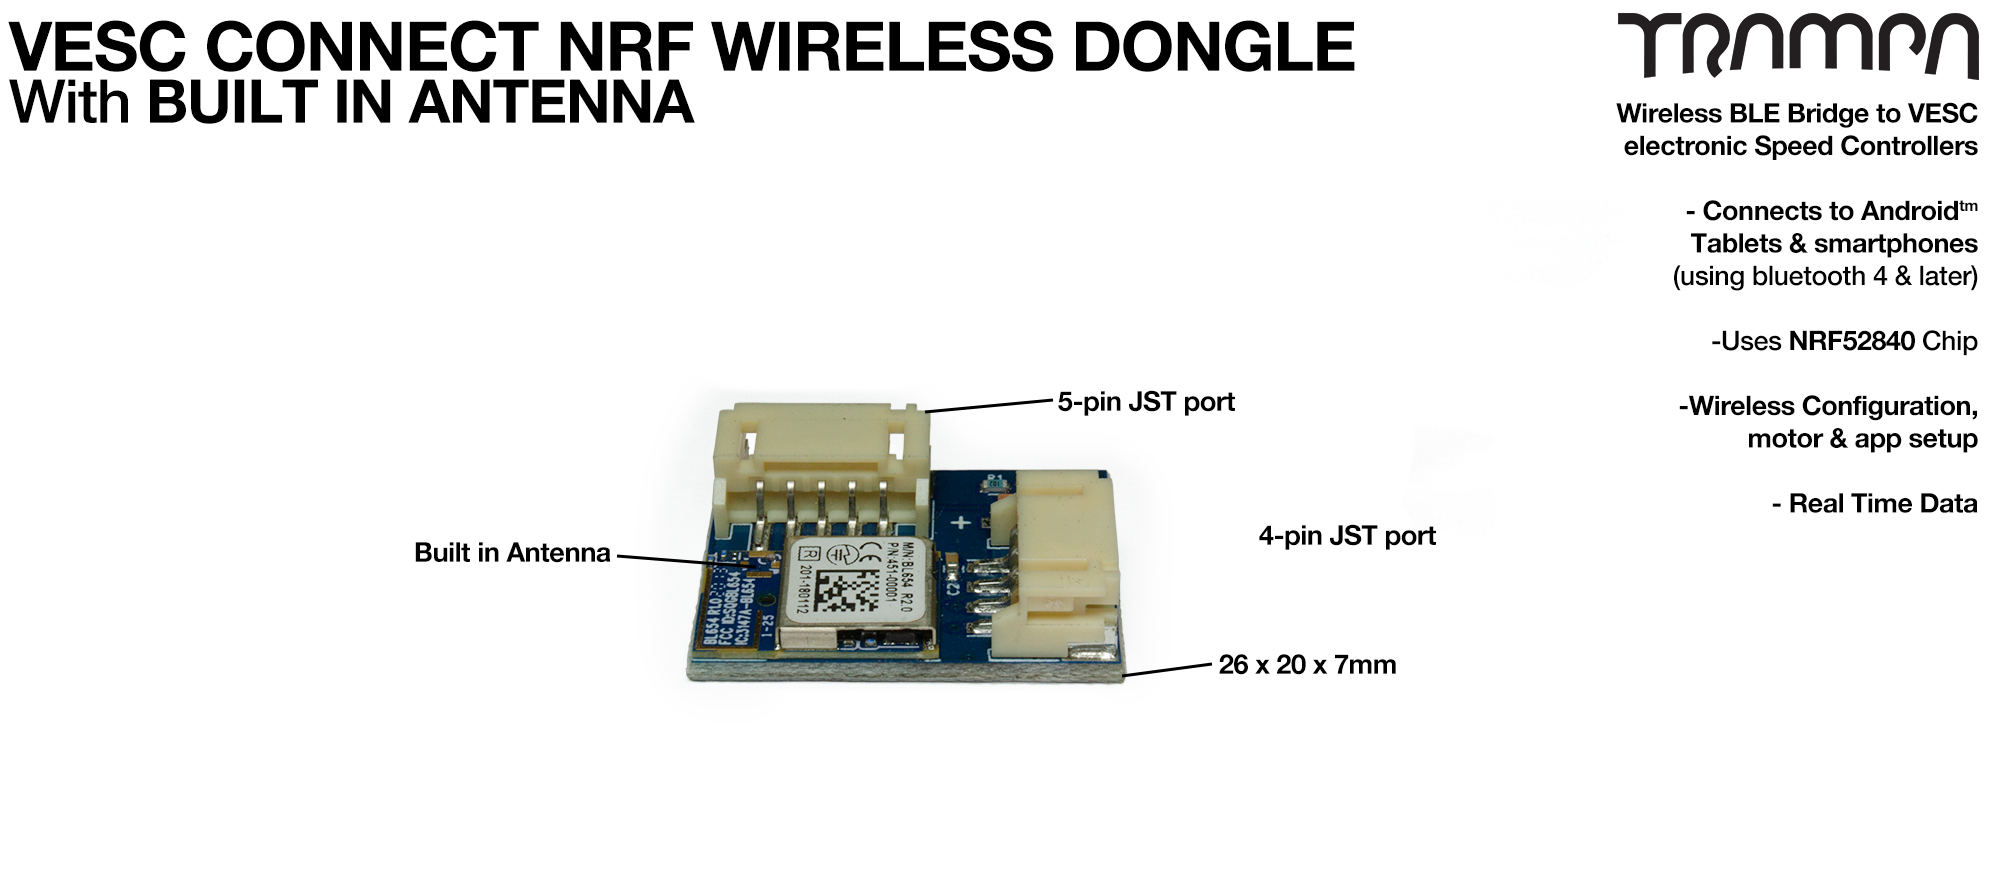 VESC Connect NRF Dongle with INTEGRATED Antenna